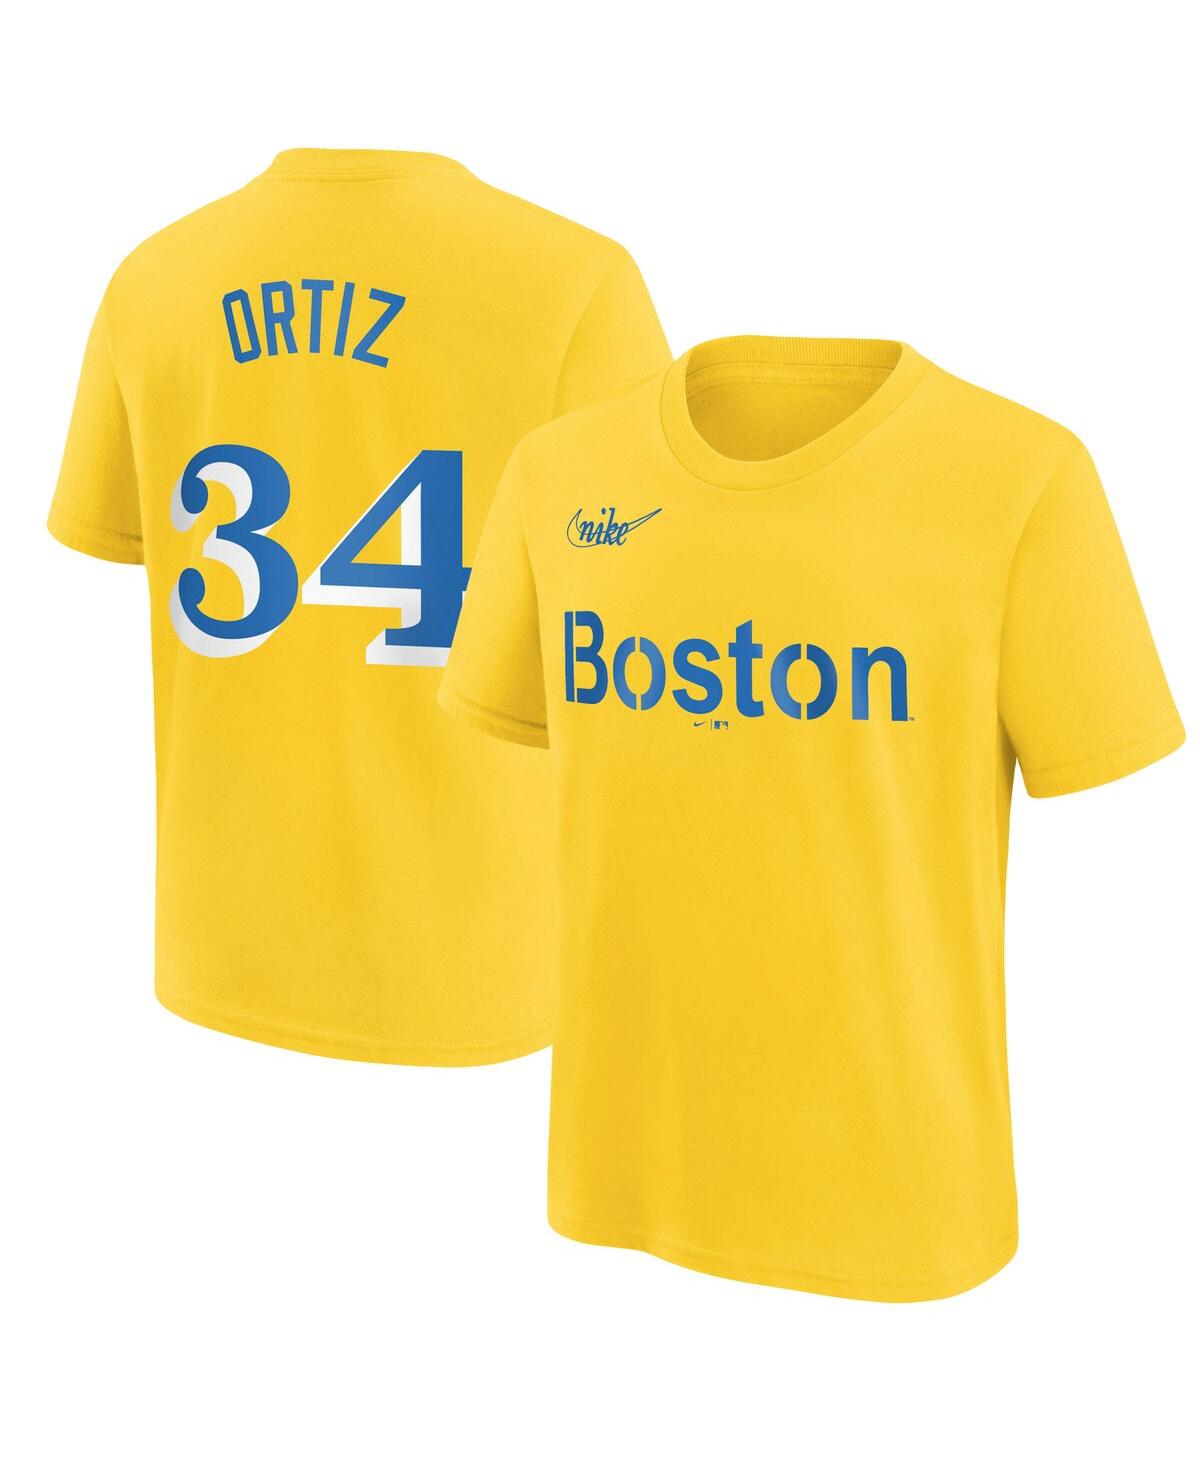 NIKE BIG BOYS NIKE DAVID ORTIZ GOLD BOSTON RED SOX CITY CONNECT NAME AND NUMBER T-SHIRT